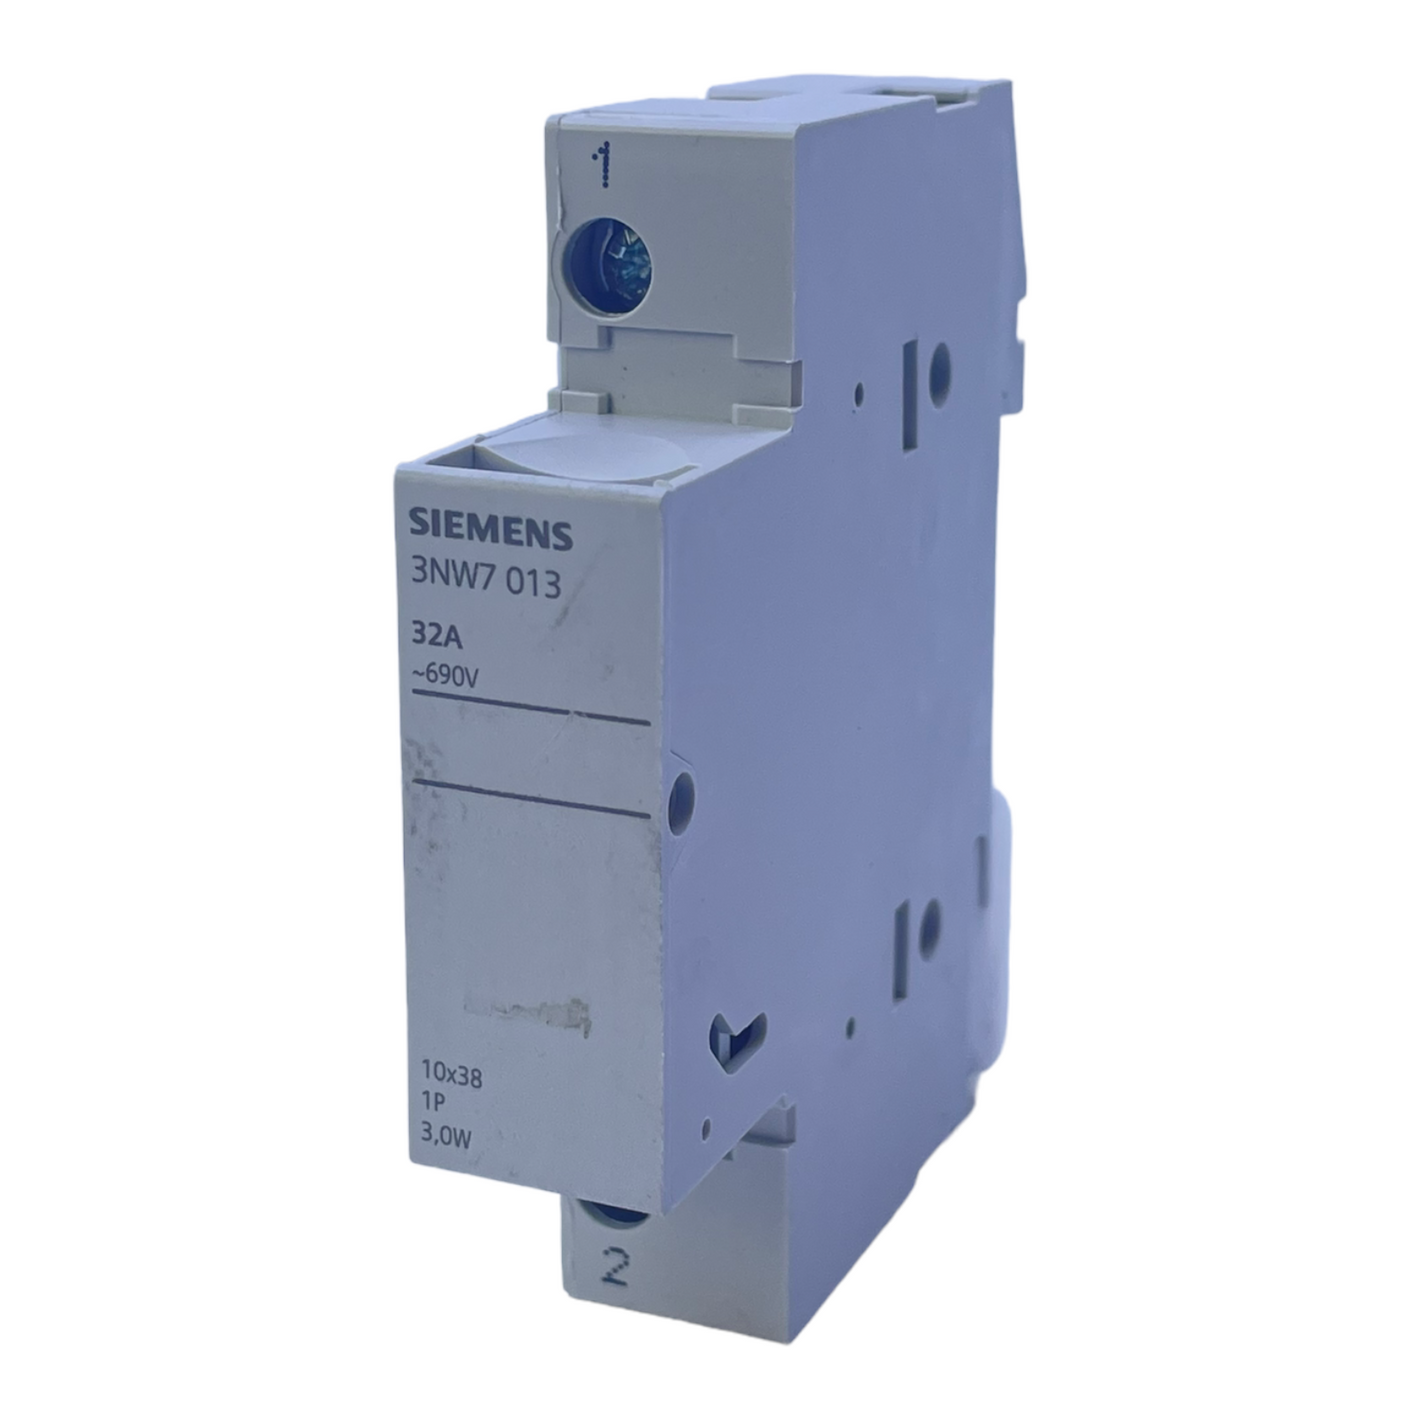 Siemens 3NW7013 fuse for industrial use 690V AC 30A fuse